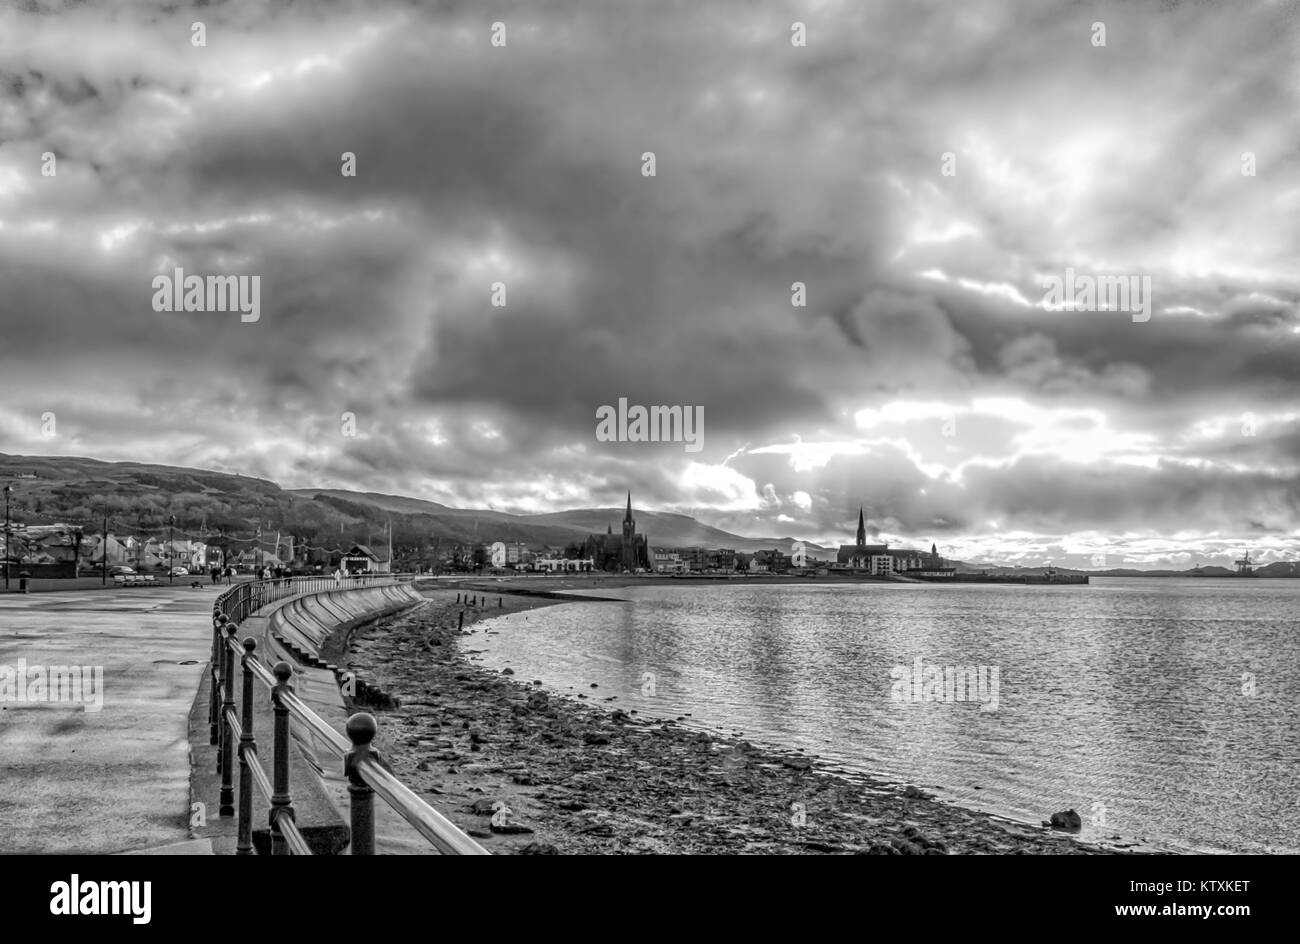 The town of larseafrgs from its seafront on a cold December Boxing day 2017. Looking from the North Esplanade into the Town centre.in Black and White. Stock Photo